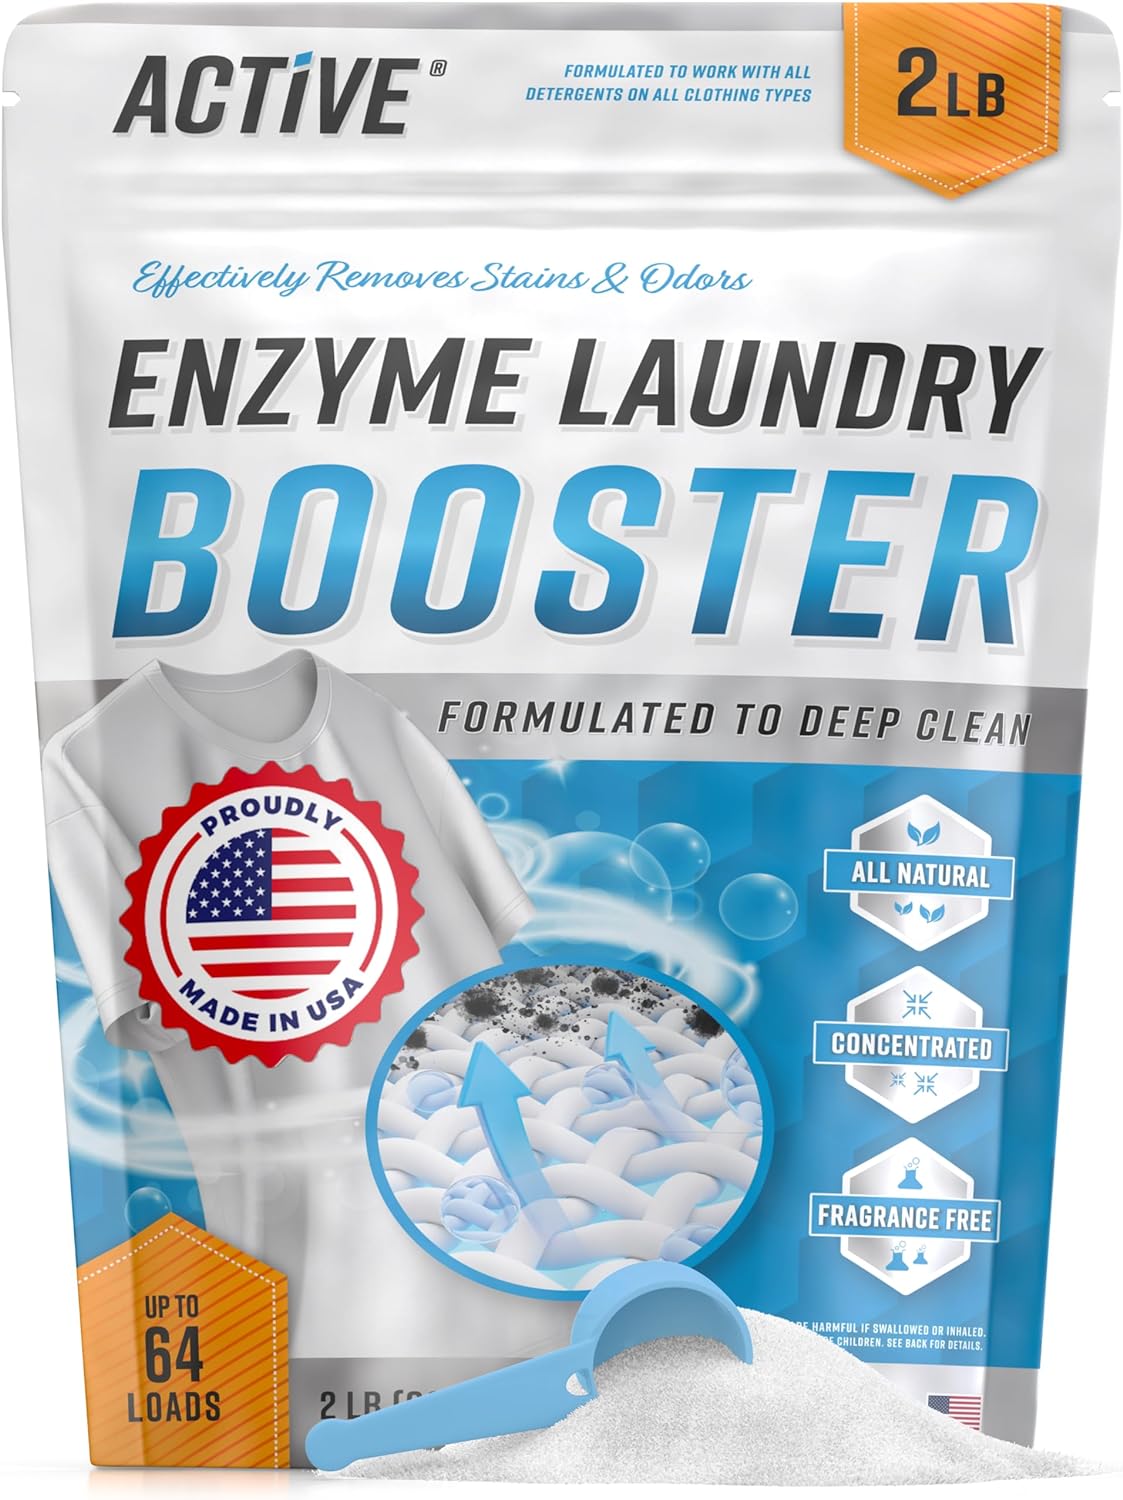 Enzyme Laundry Booster Odor Remover - 2 lbs Unscented Enzymatic Clothes Stain Cleaner Powder, Natural Deodorizer with Bio Active Enzymes, Detergent Additive Eliminator for Sweat, Oil, Blood - 64 Loads